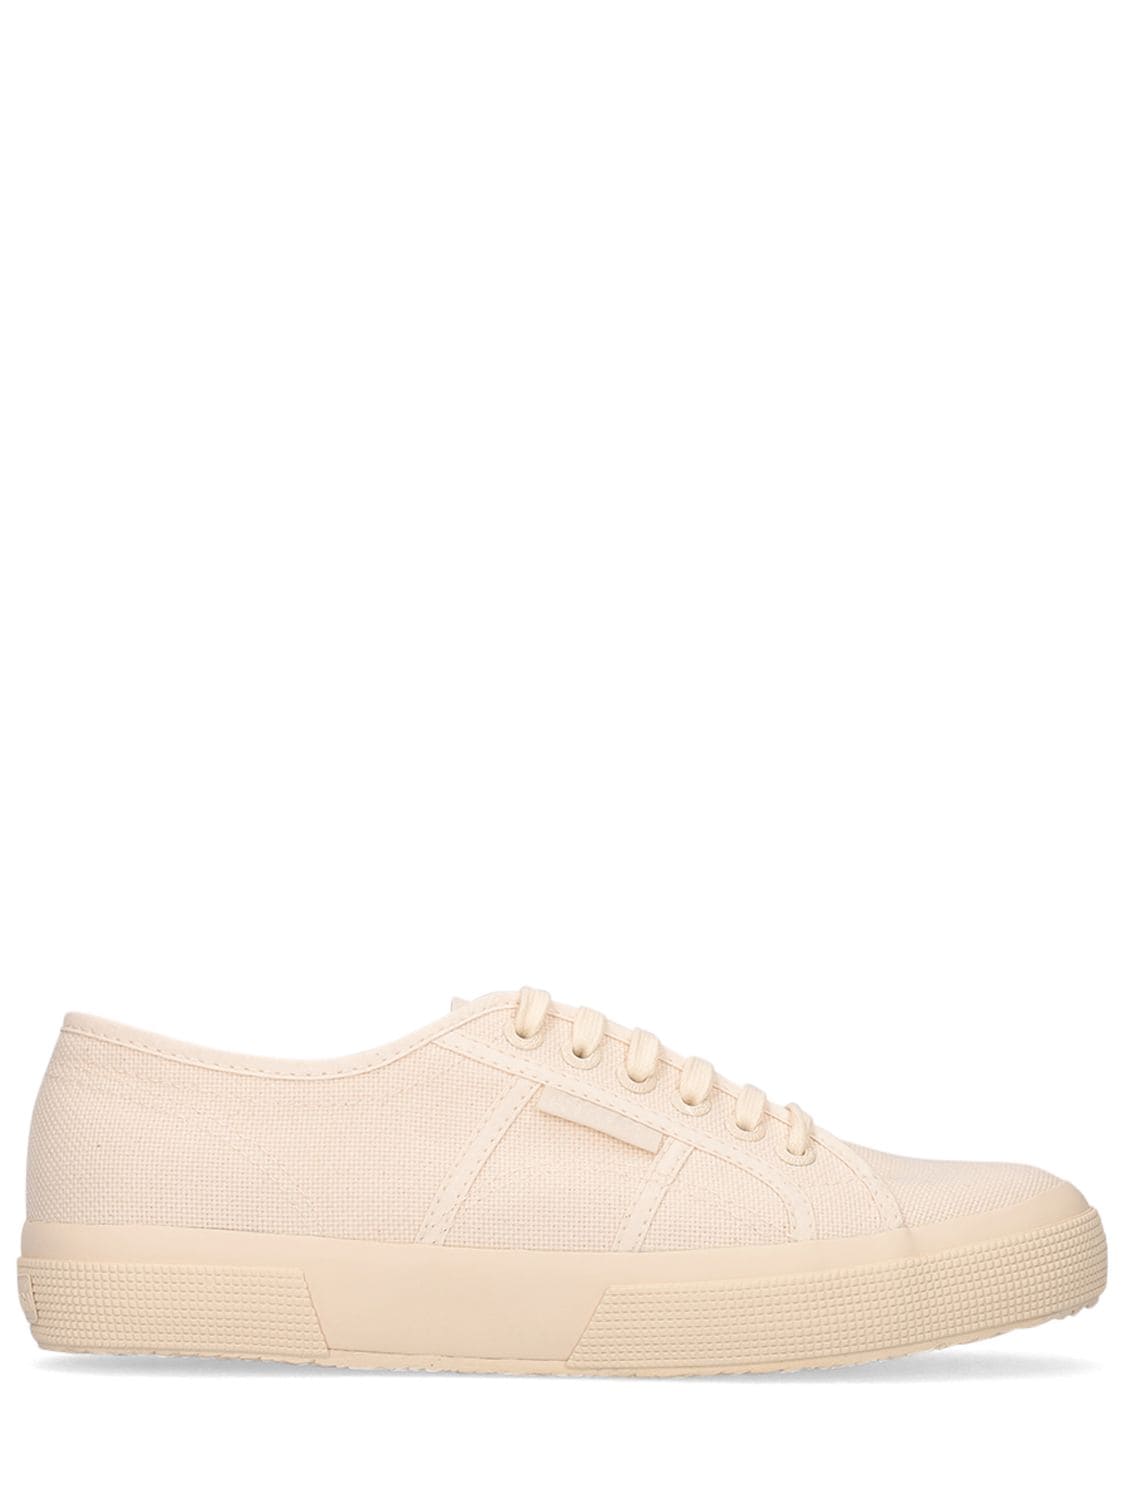 Superga Logo Canvas Sneakers In Beige Raw